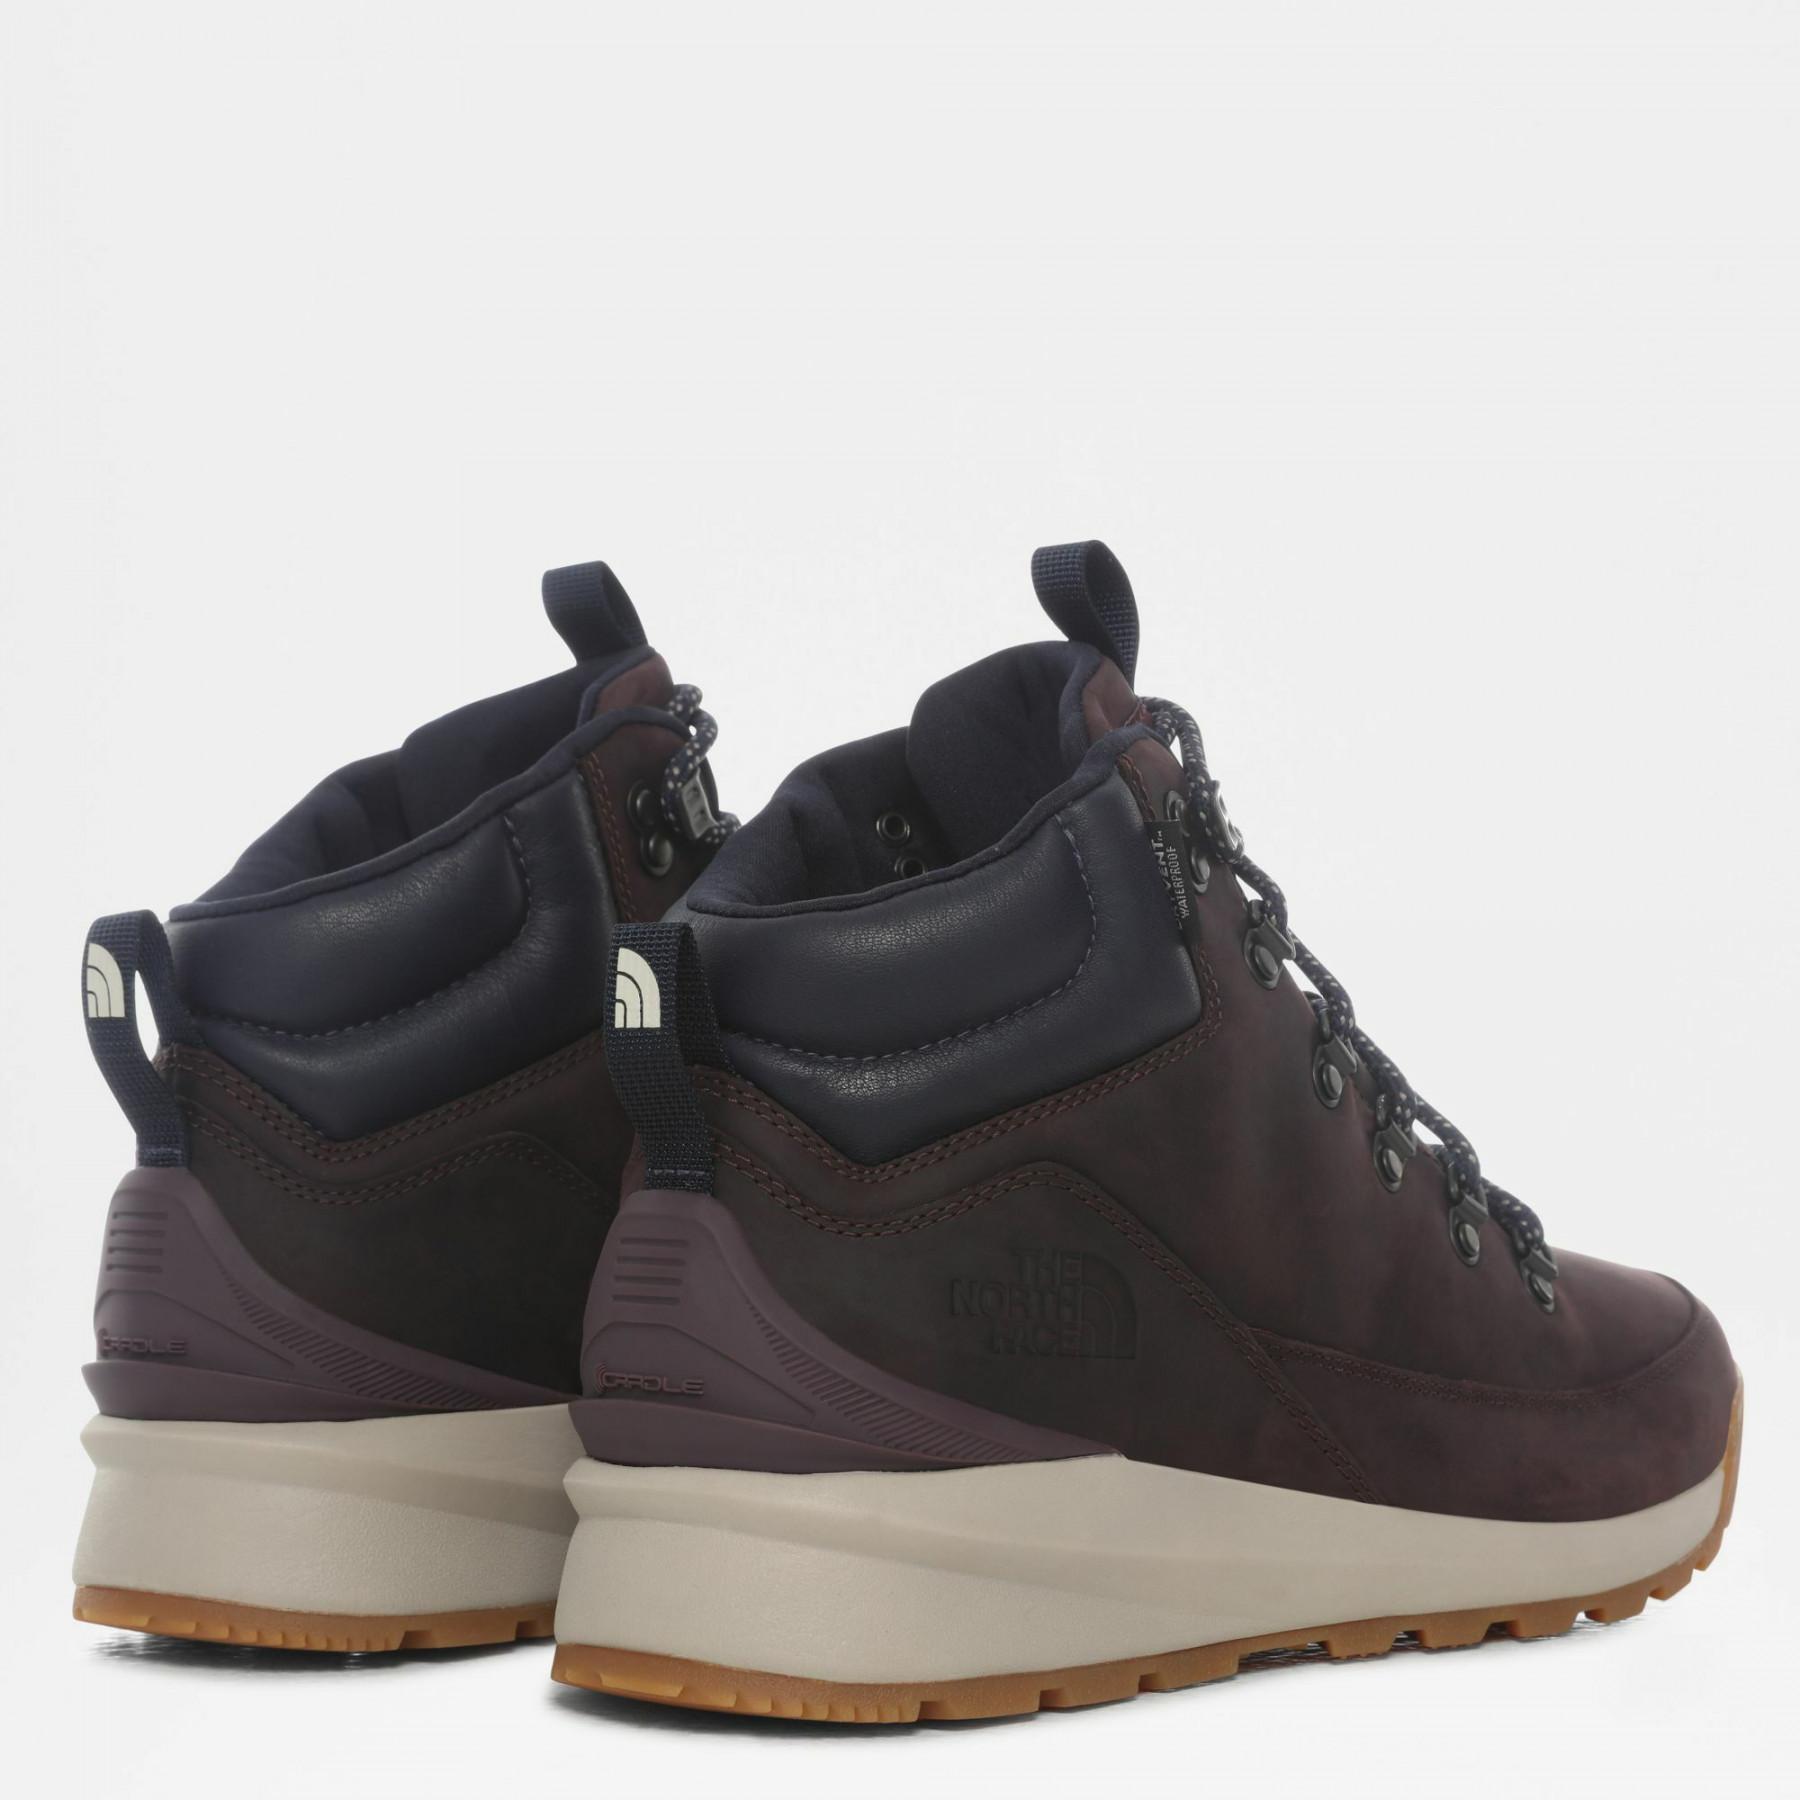 Trainers The North Face Premium waterproof-leather